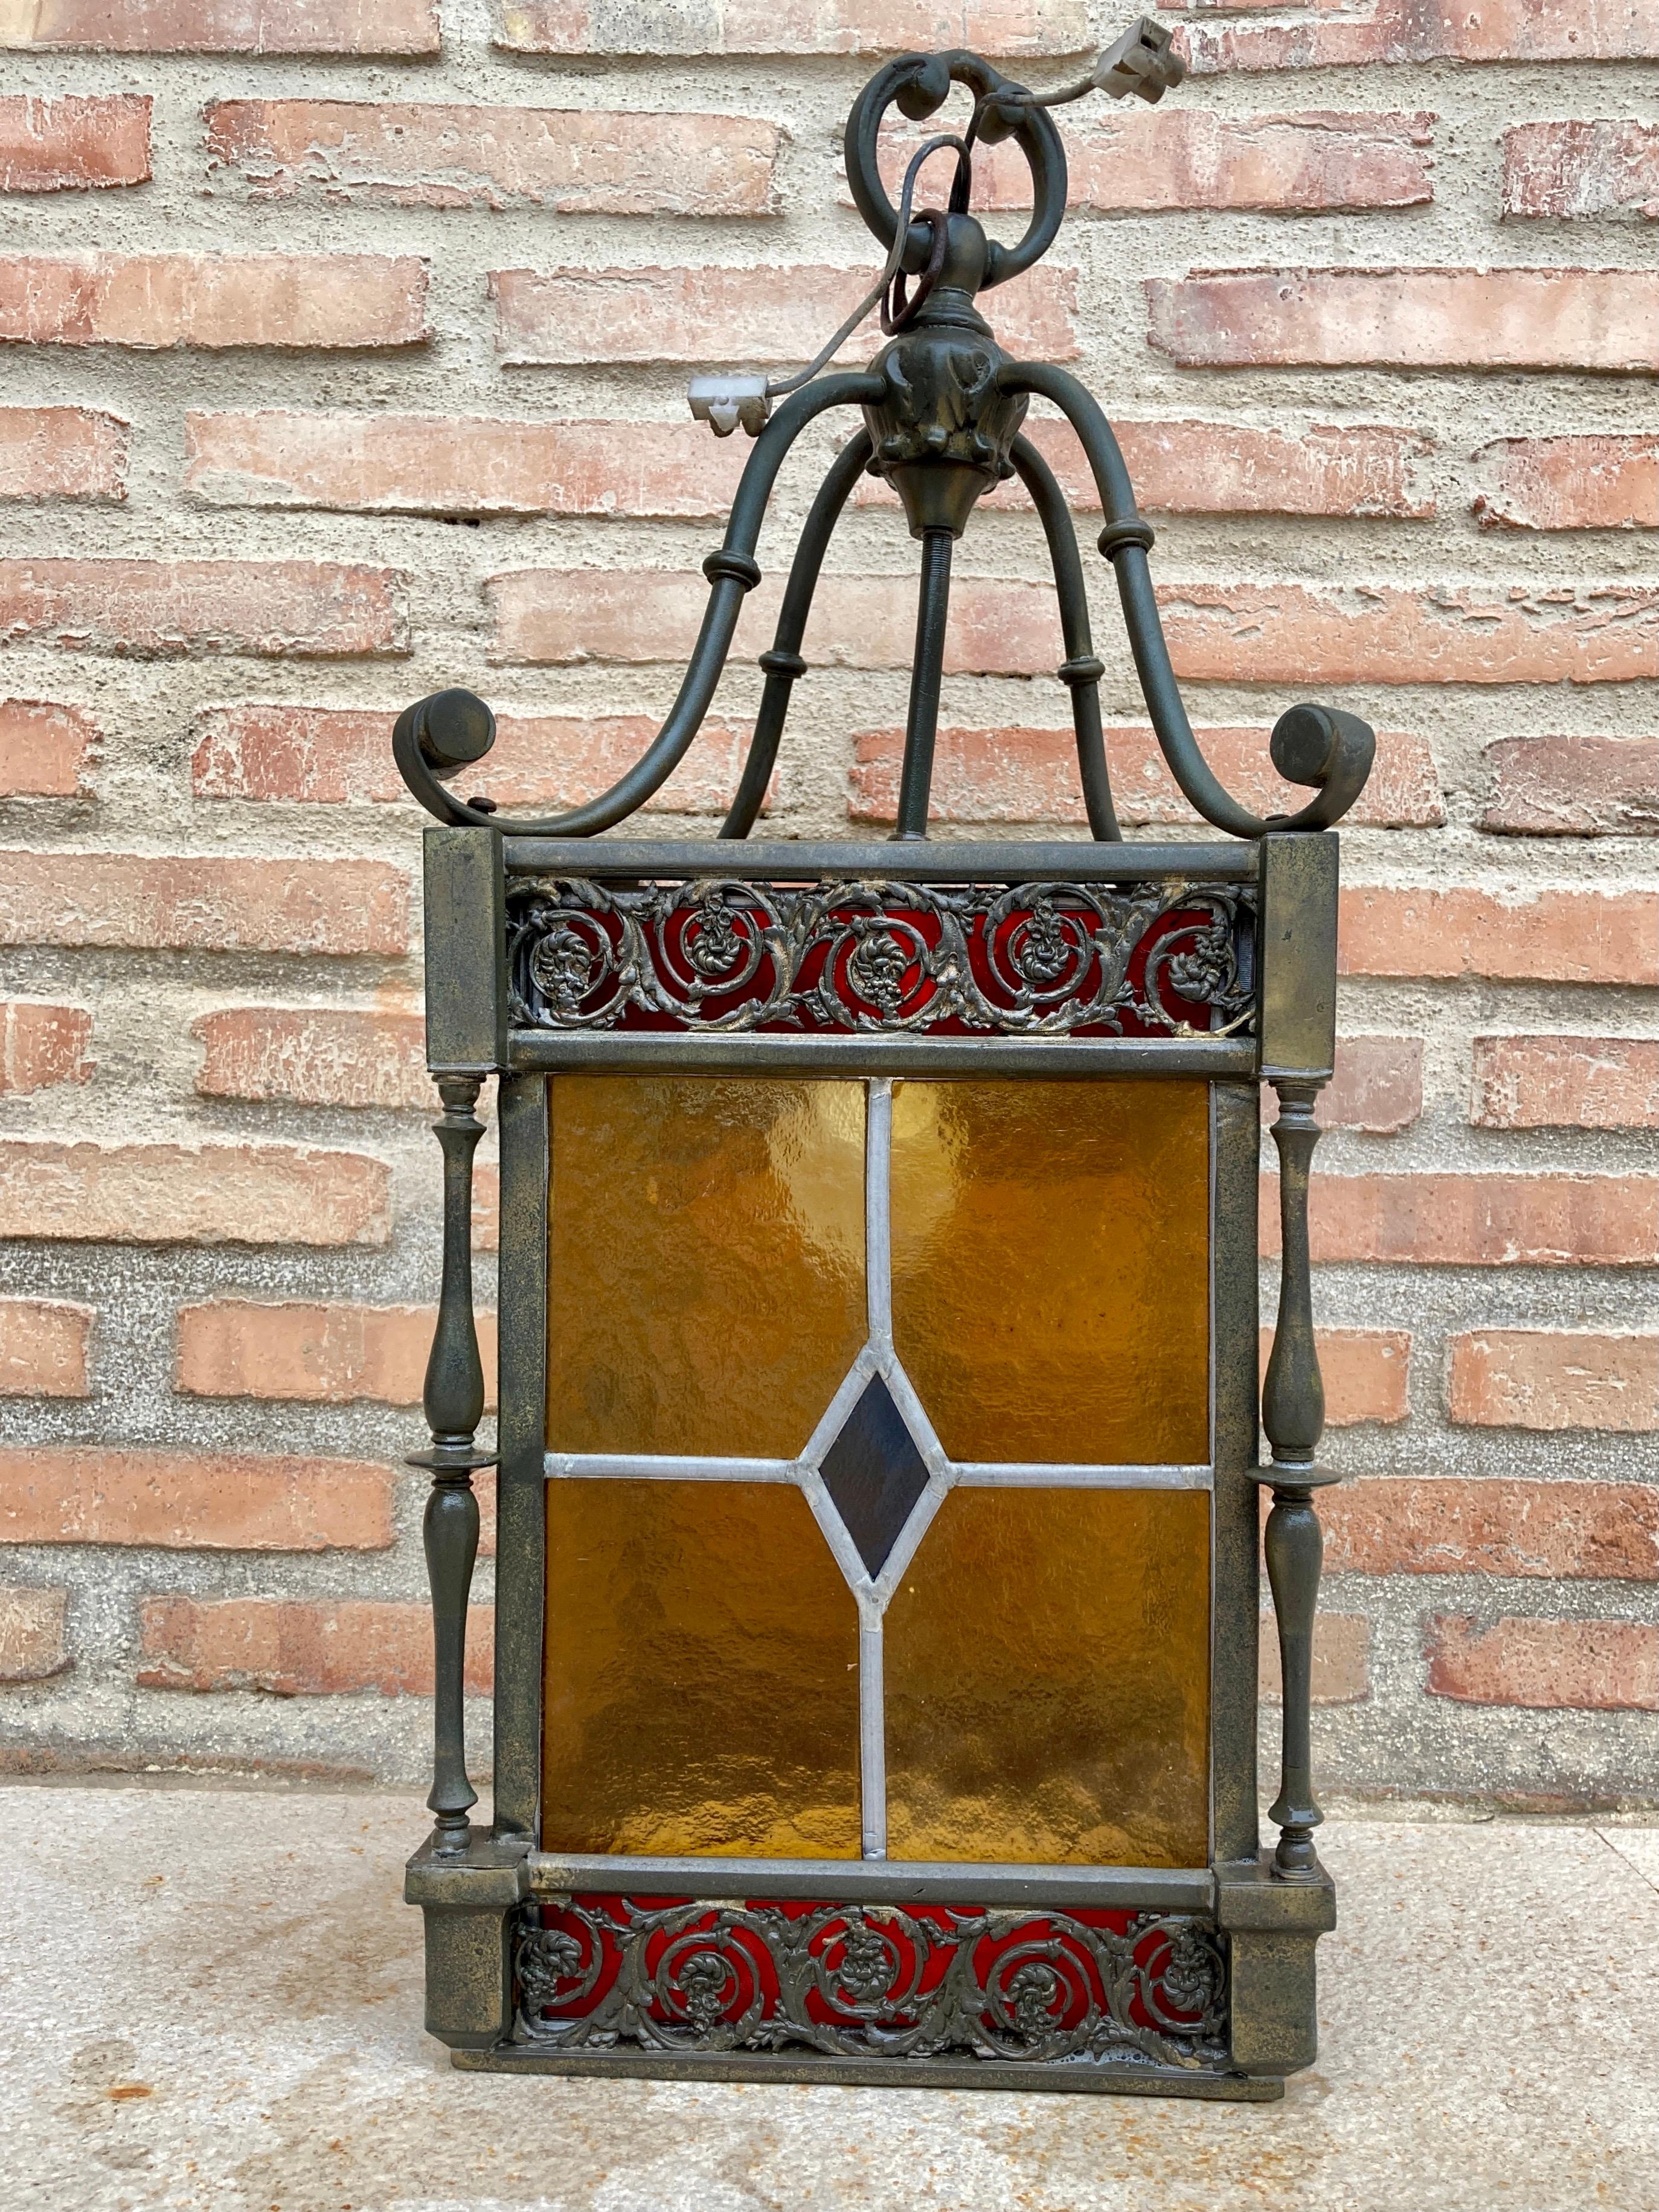 Antique wrought iron and stained glass ceiling lantern lamp

Old outdoor lantern lamp with wrought iron ceiling and colored glass.

Wrought iron lantern with good ornamental work, it serves both for interior and exterior. Very robust, good